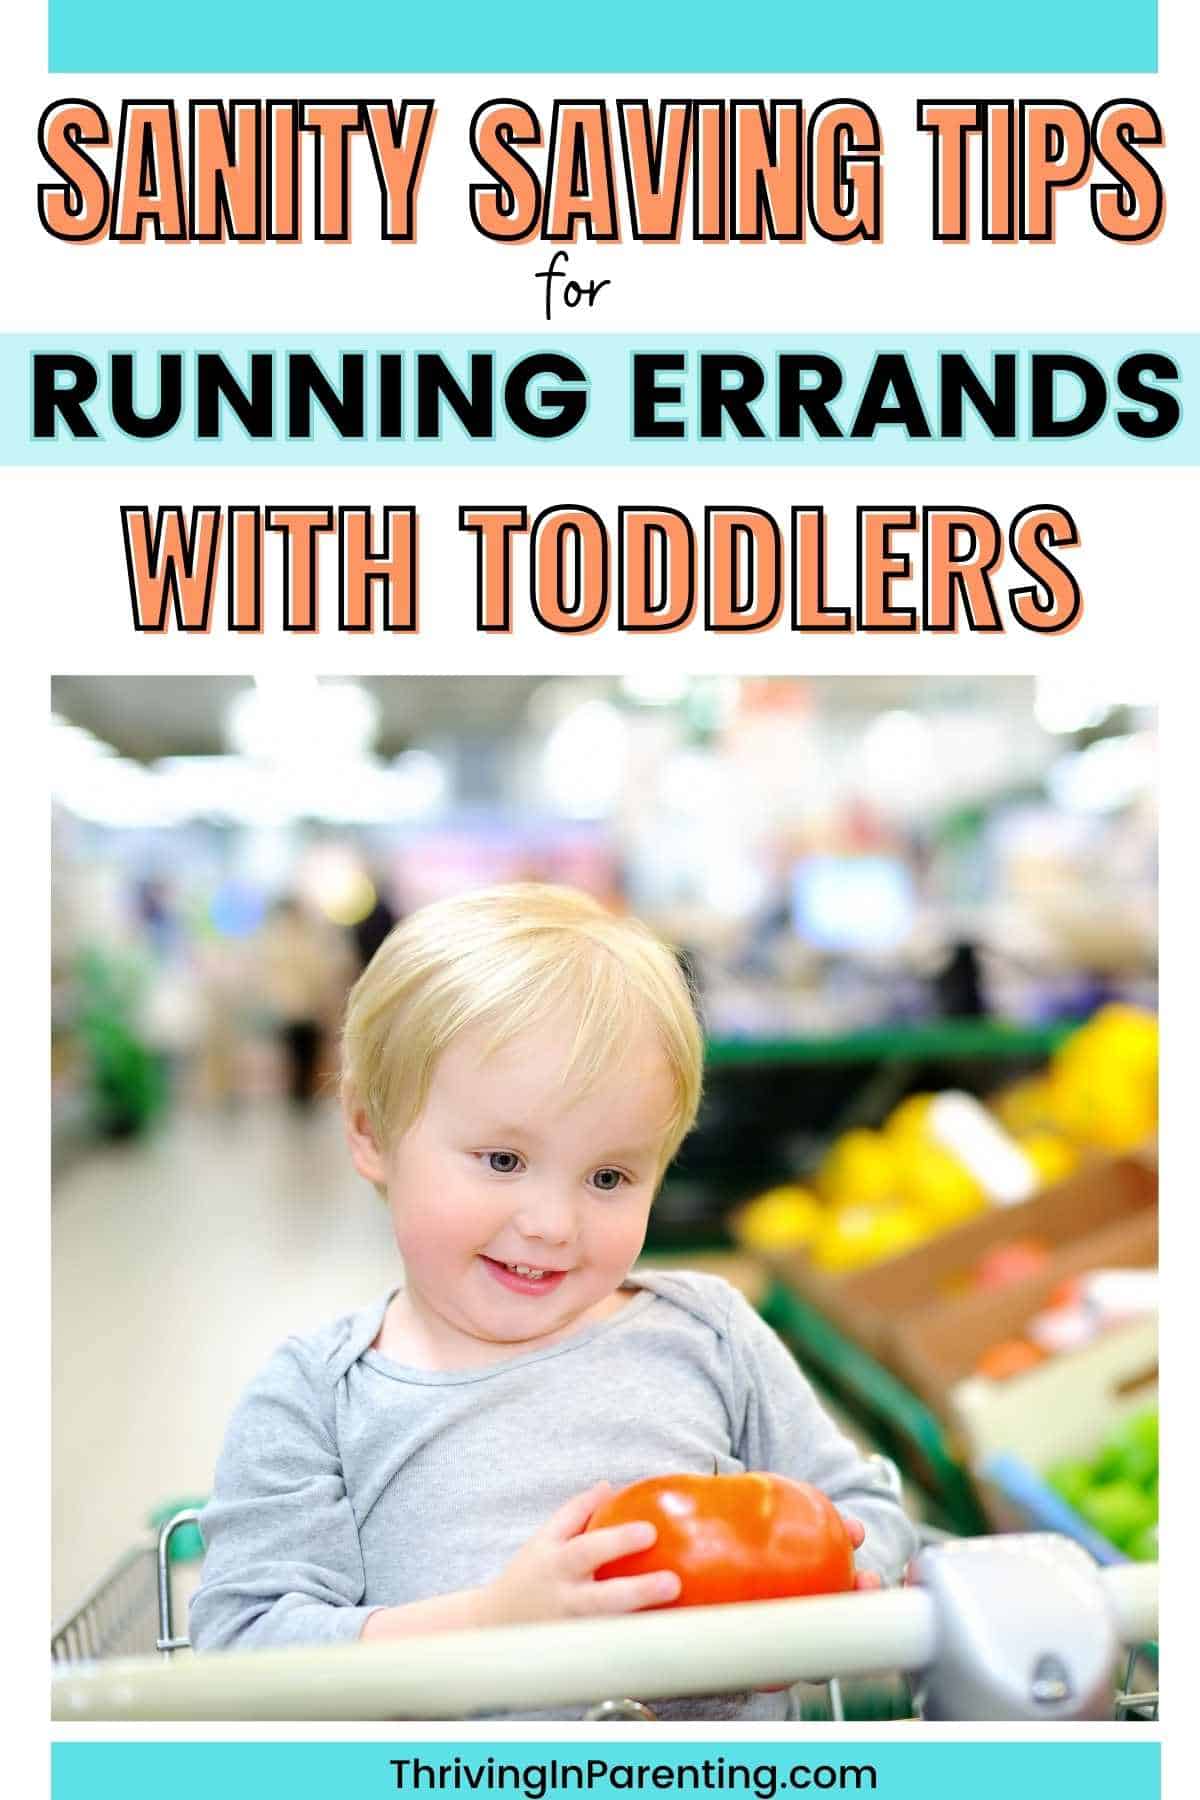 Pin image of a toddler in a shopping cart holding tomato and text reading Sanity saving tips for running errands with toddlers.